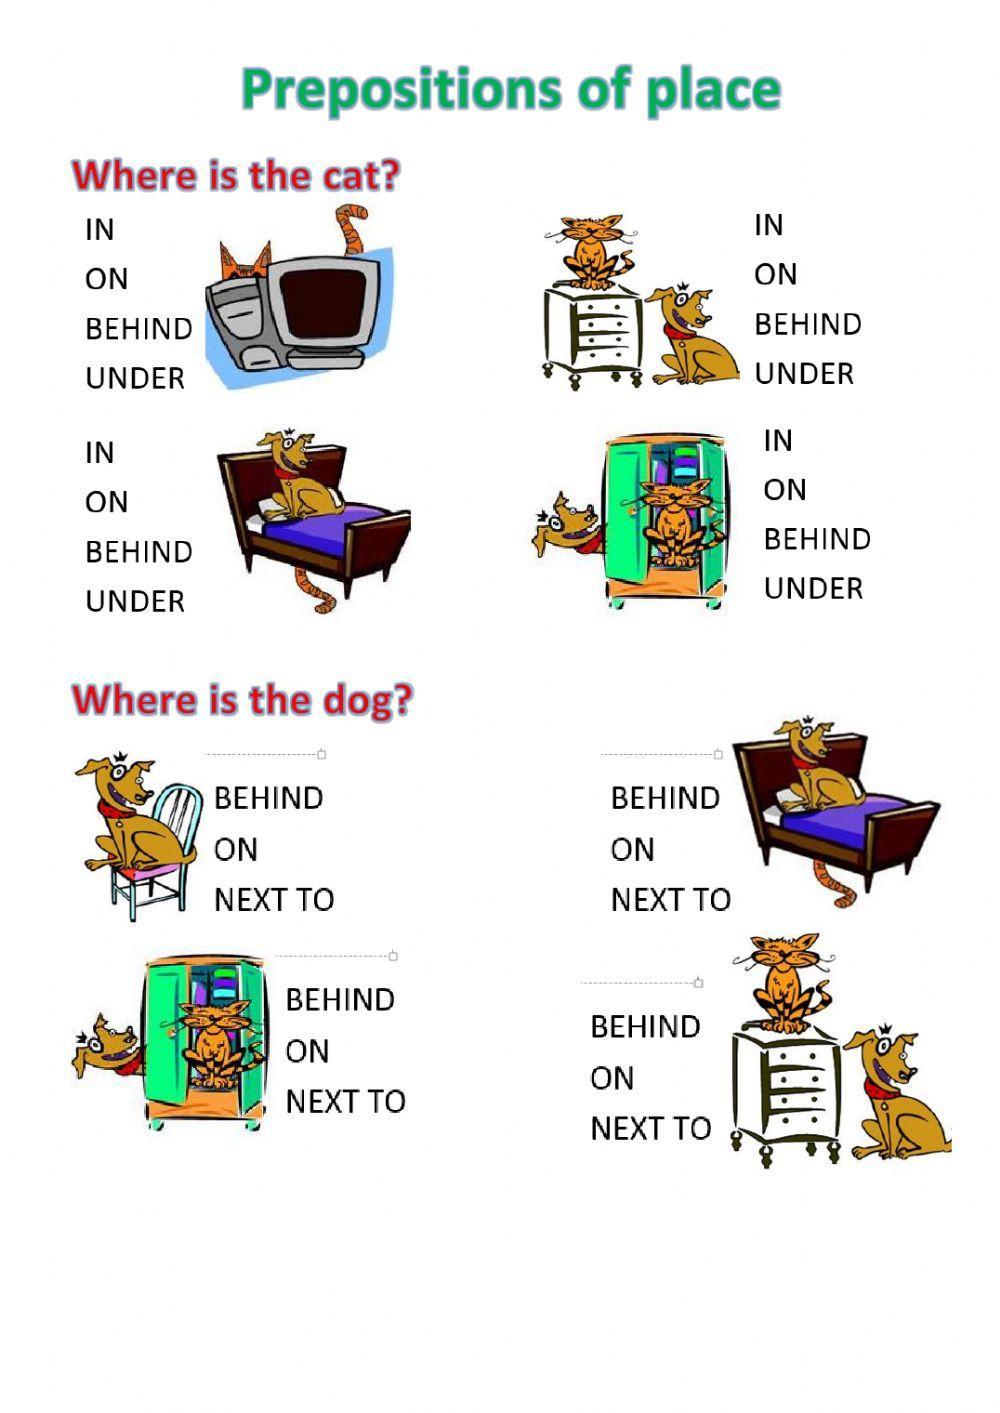 Prepositions of place 1